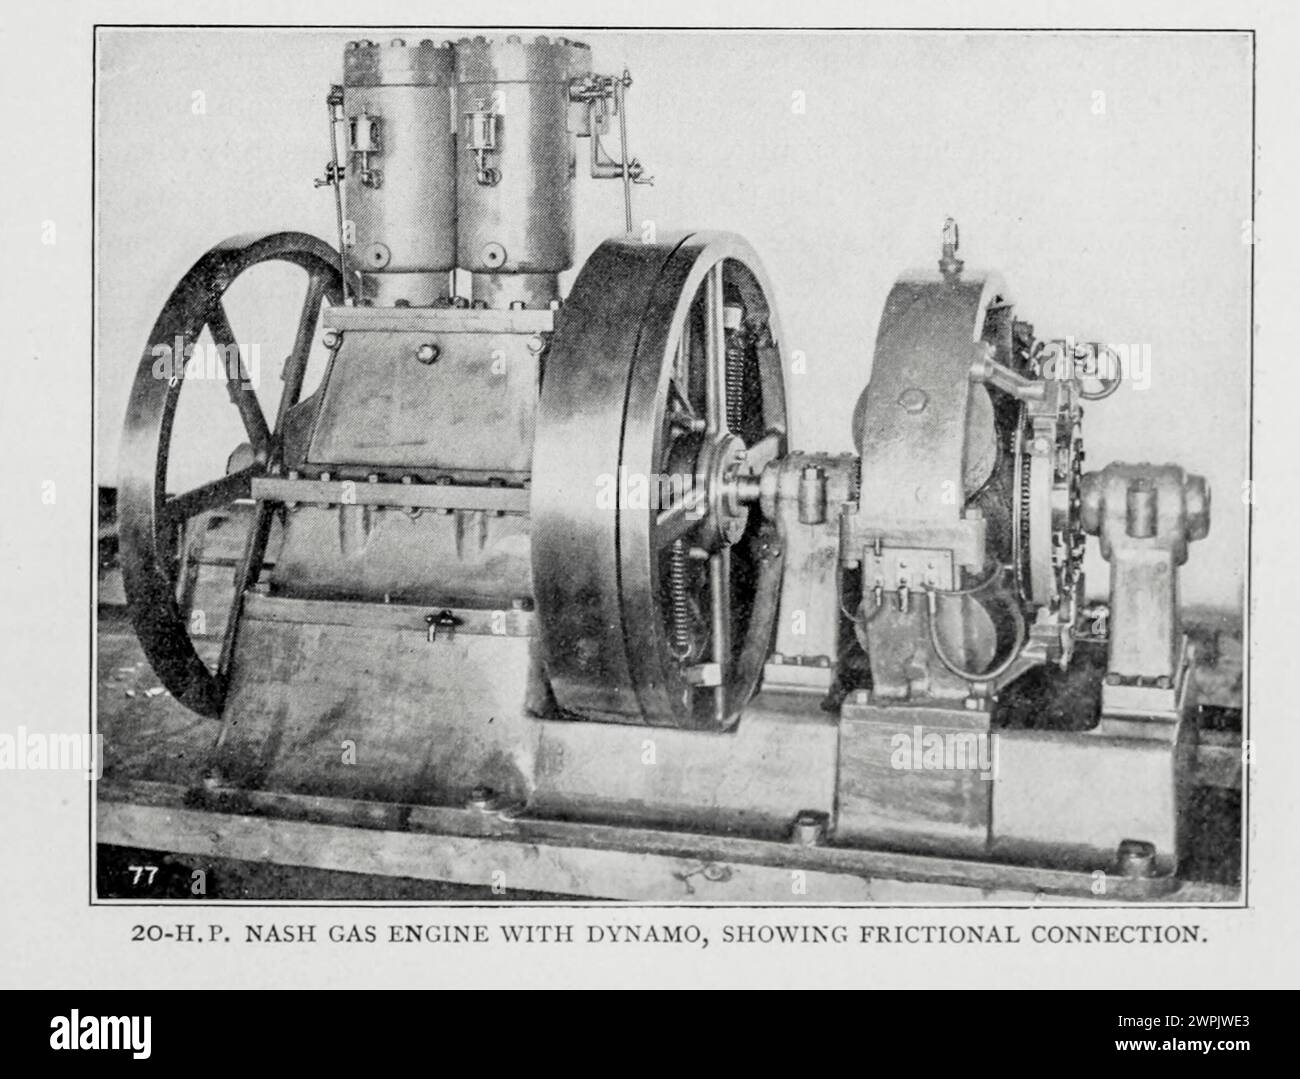 20-H.P. Nash system, Gas Engine with dynamo, showing frictional connection  from the Article THE GAS ENGINE IN AMERICAN PRACTICE. By George Richmond from The Engineering Magazine Devoted to Industrial Progress Volume XV 1898 The Engineering Magazine Co Stock Photo